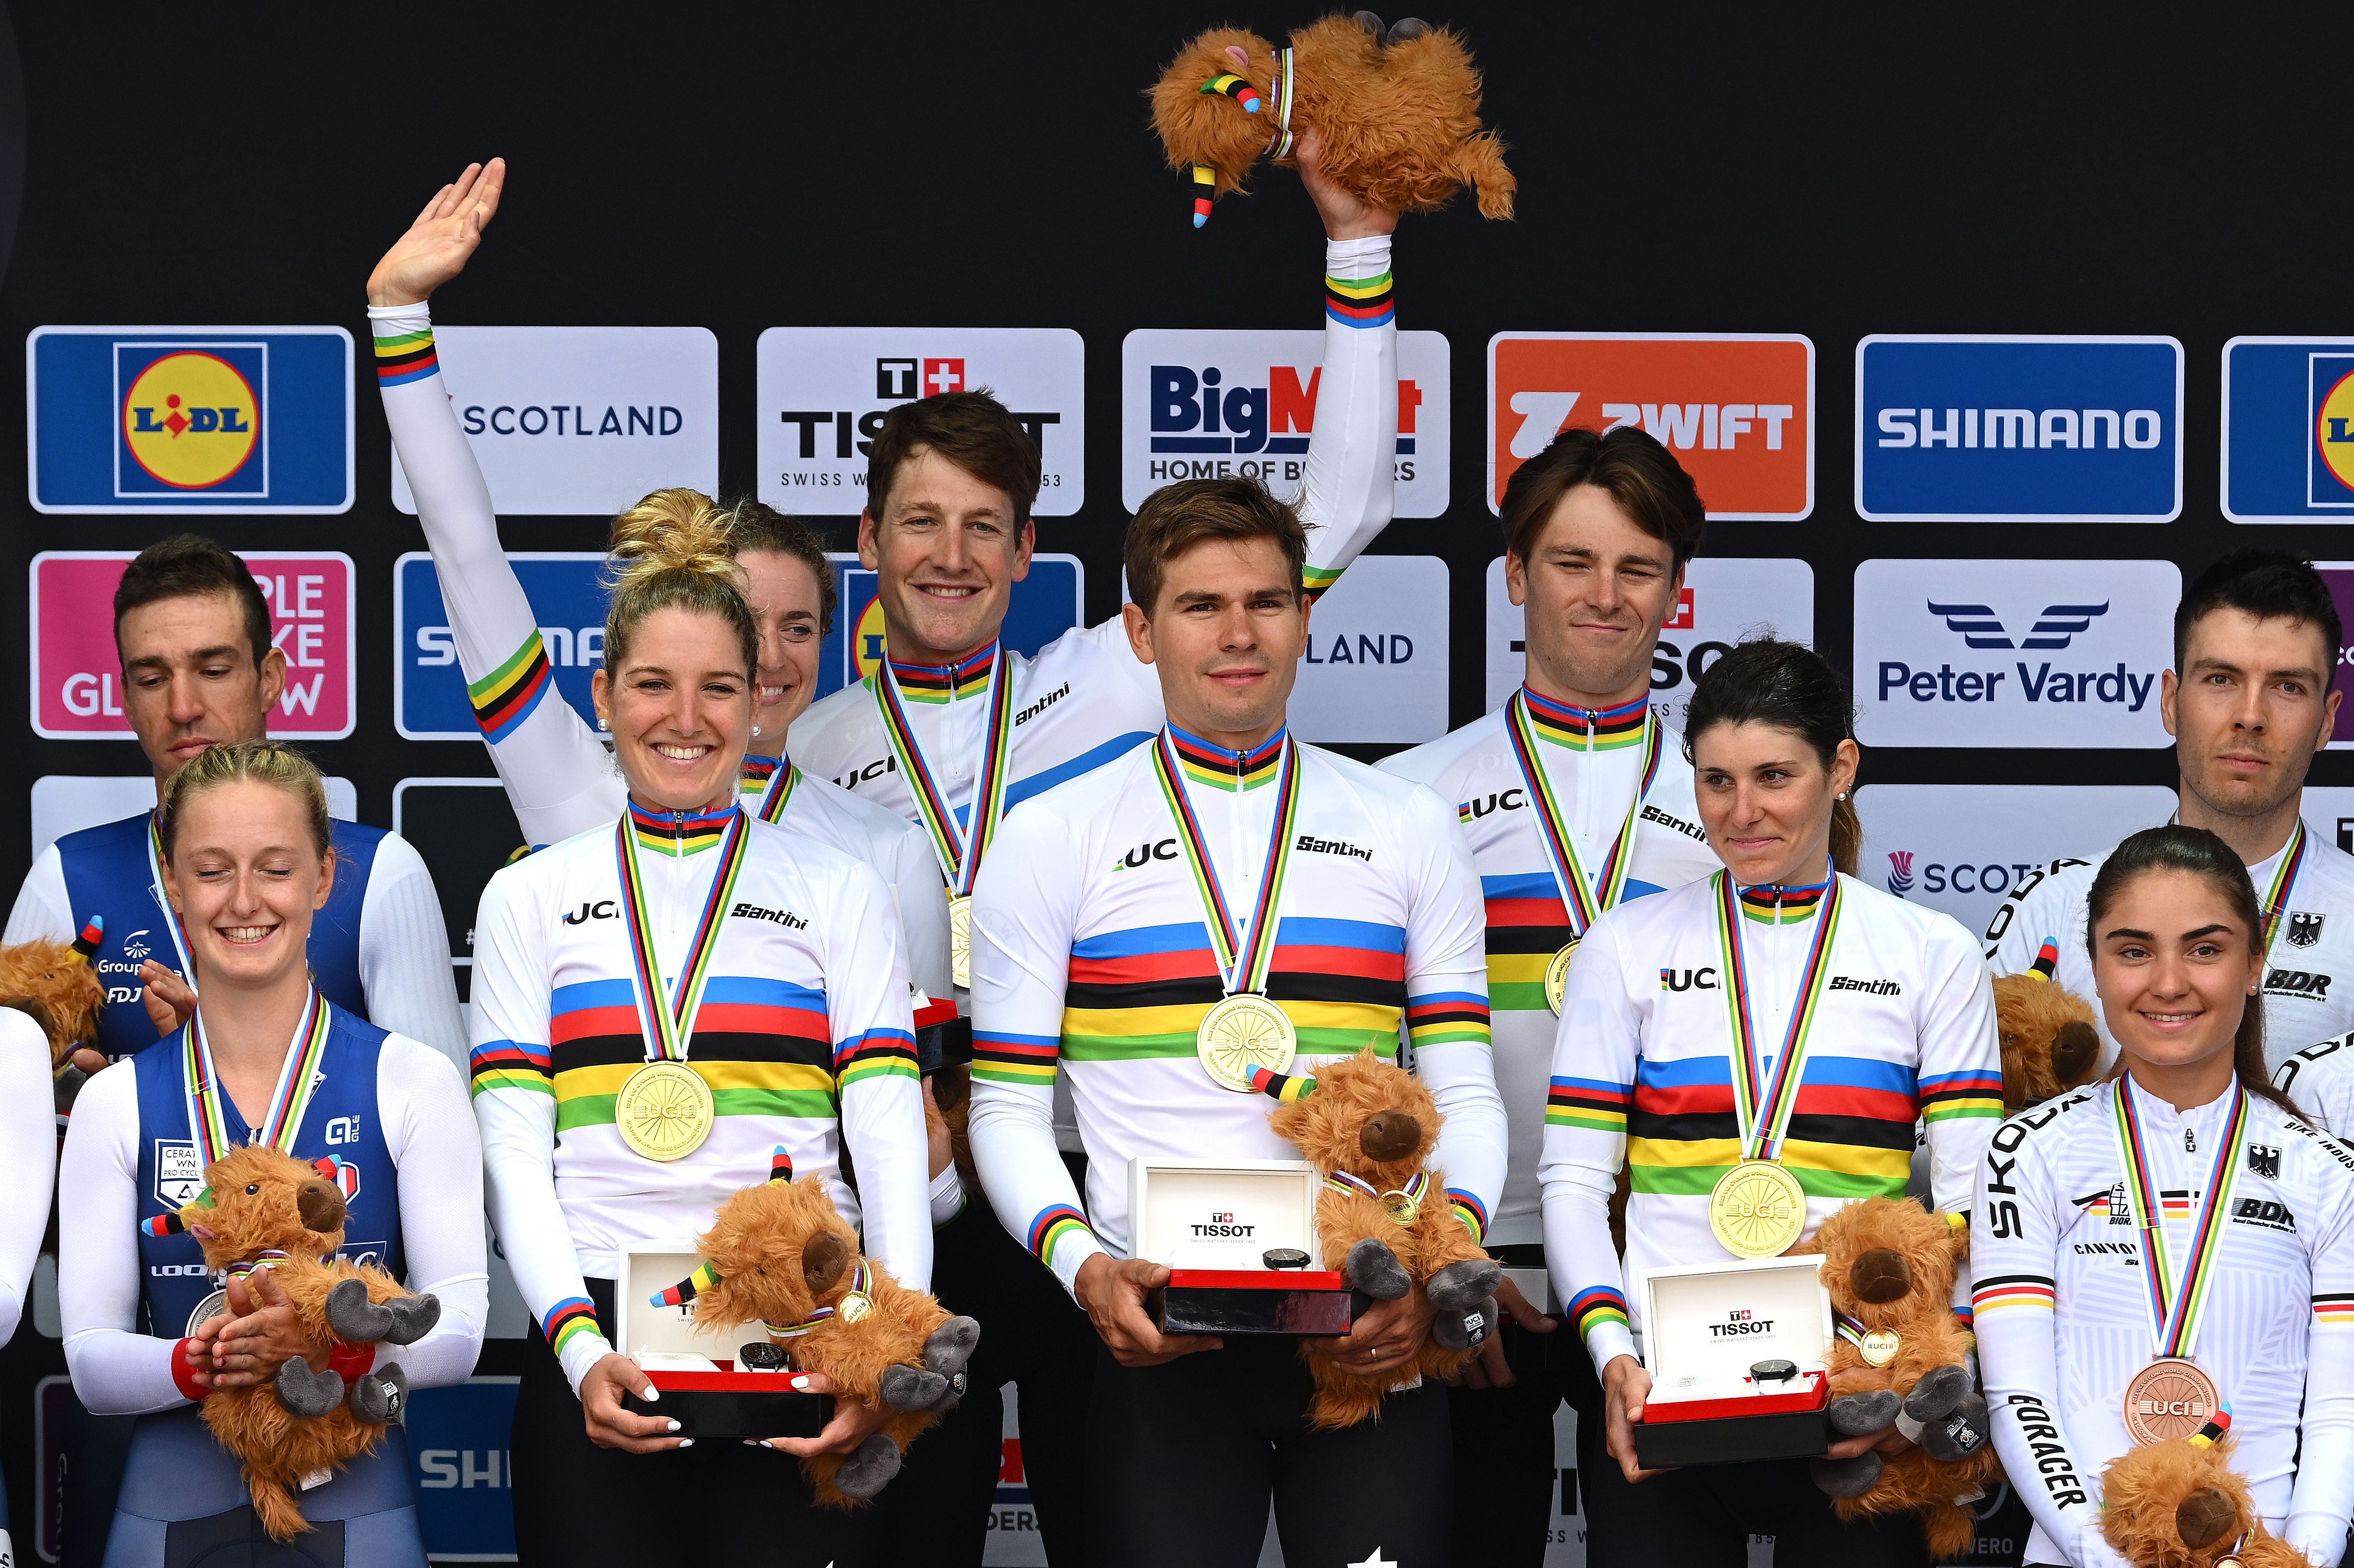 rainbow jersey meaning cycling